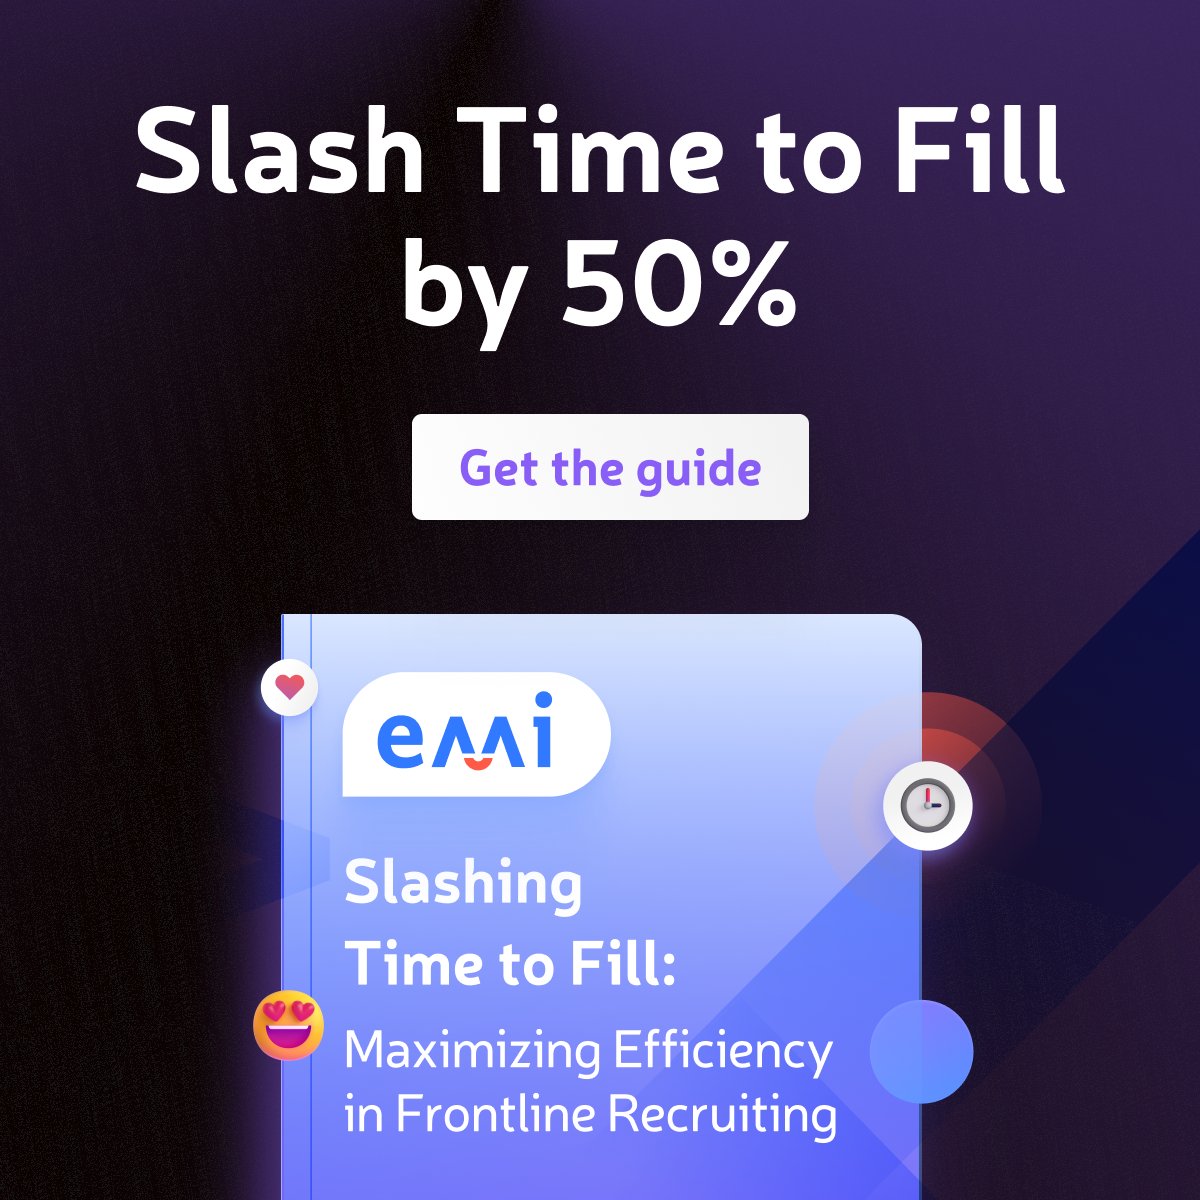 Learn how #RecruitingAutomation can transform your #hiring process, making it more efficient and effective with this great guide by @EmiLabsHQ ecs.page.link/Kwi3T #TalentAcquisition #RecruitmentEfficiency #HighVolumeHiring #Emi #HRInnovation #RecruitersGuide